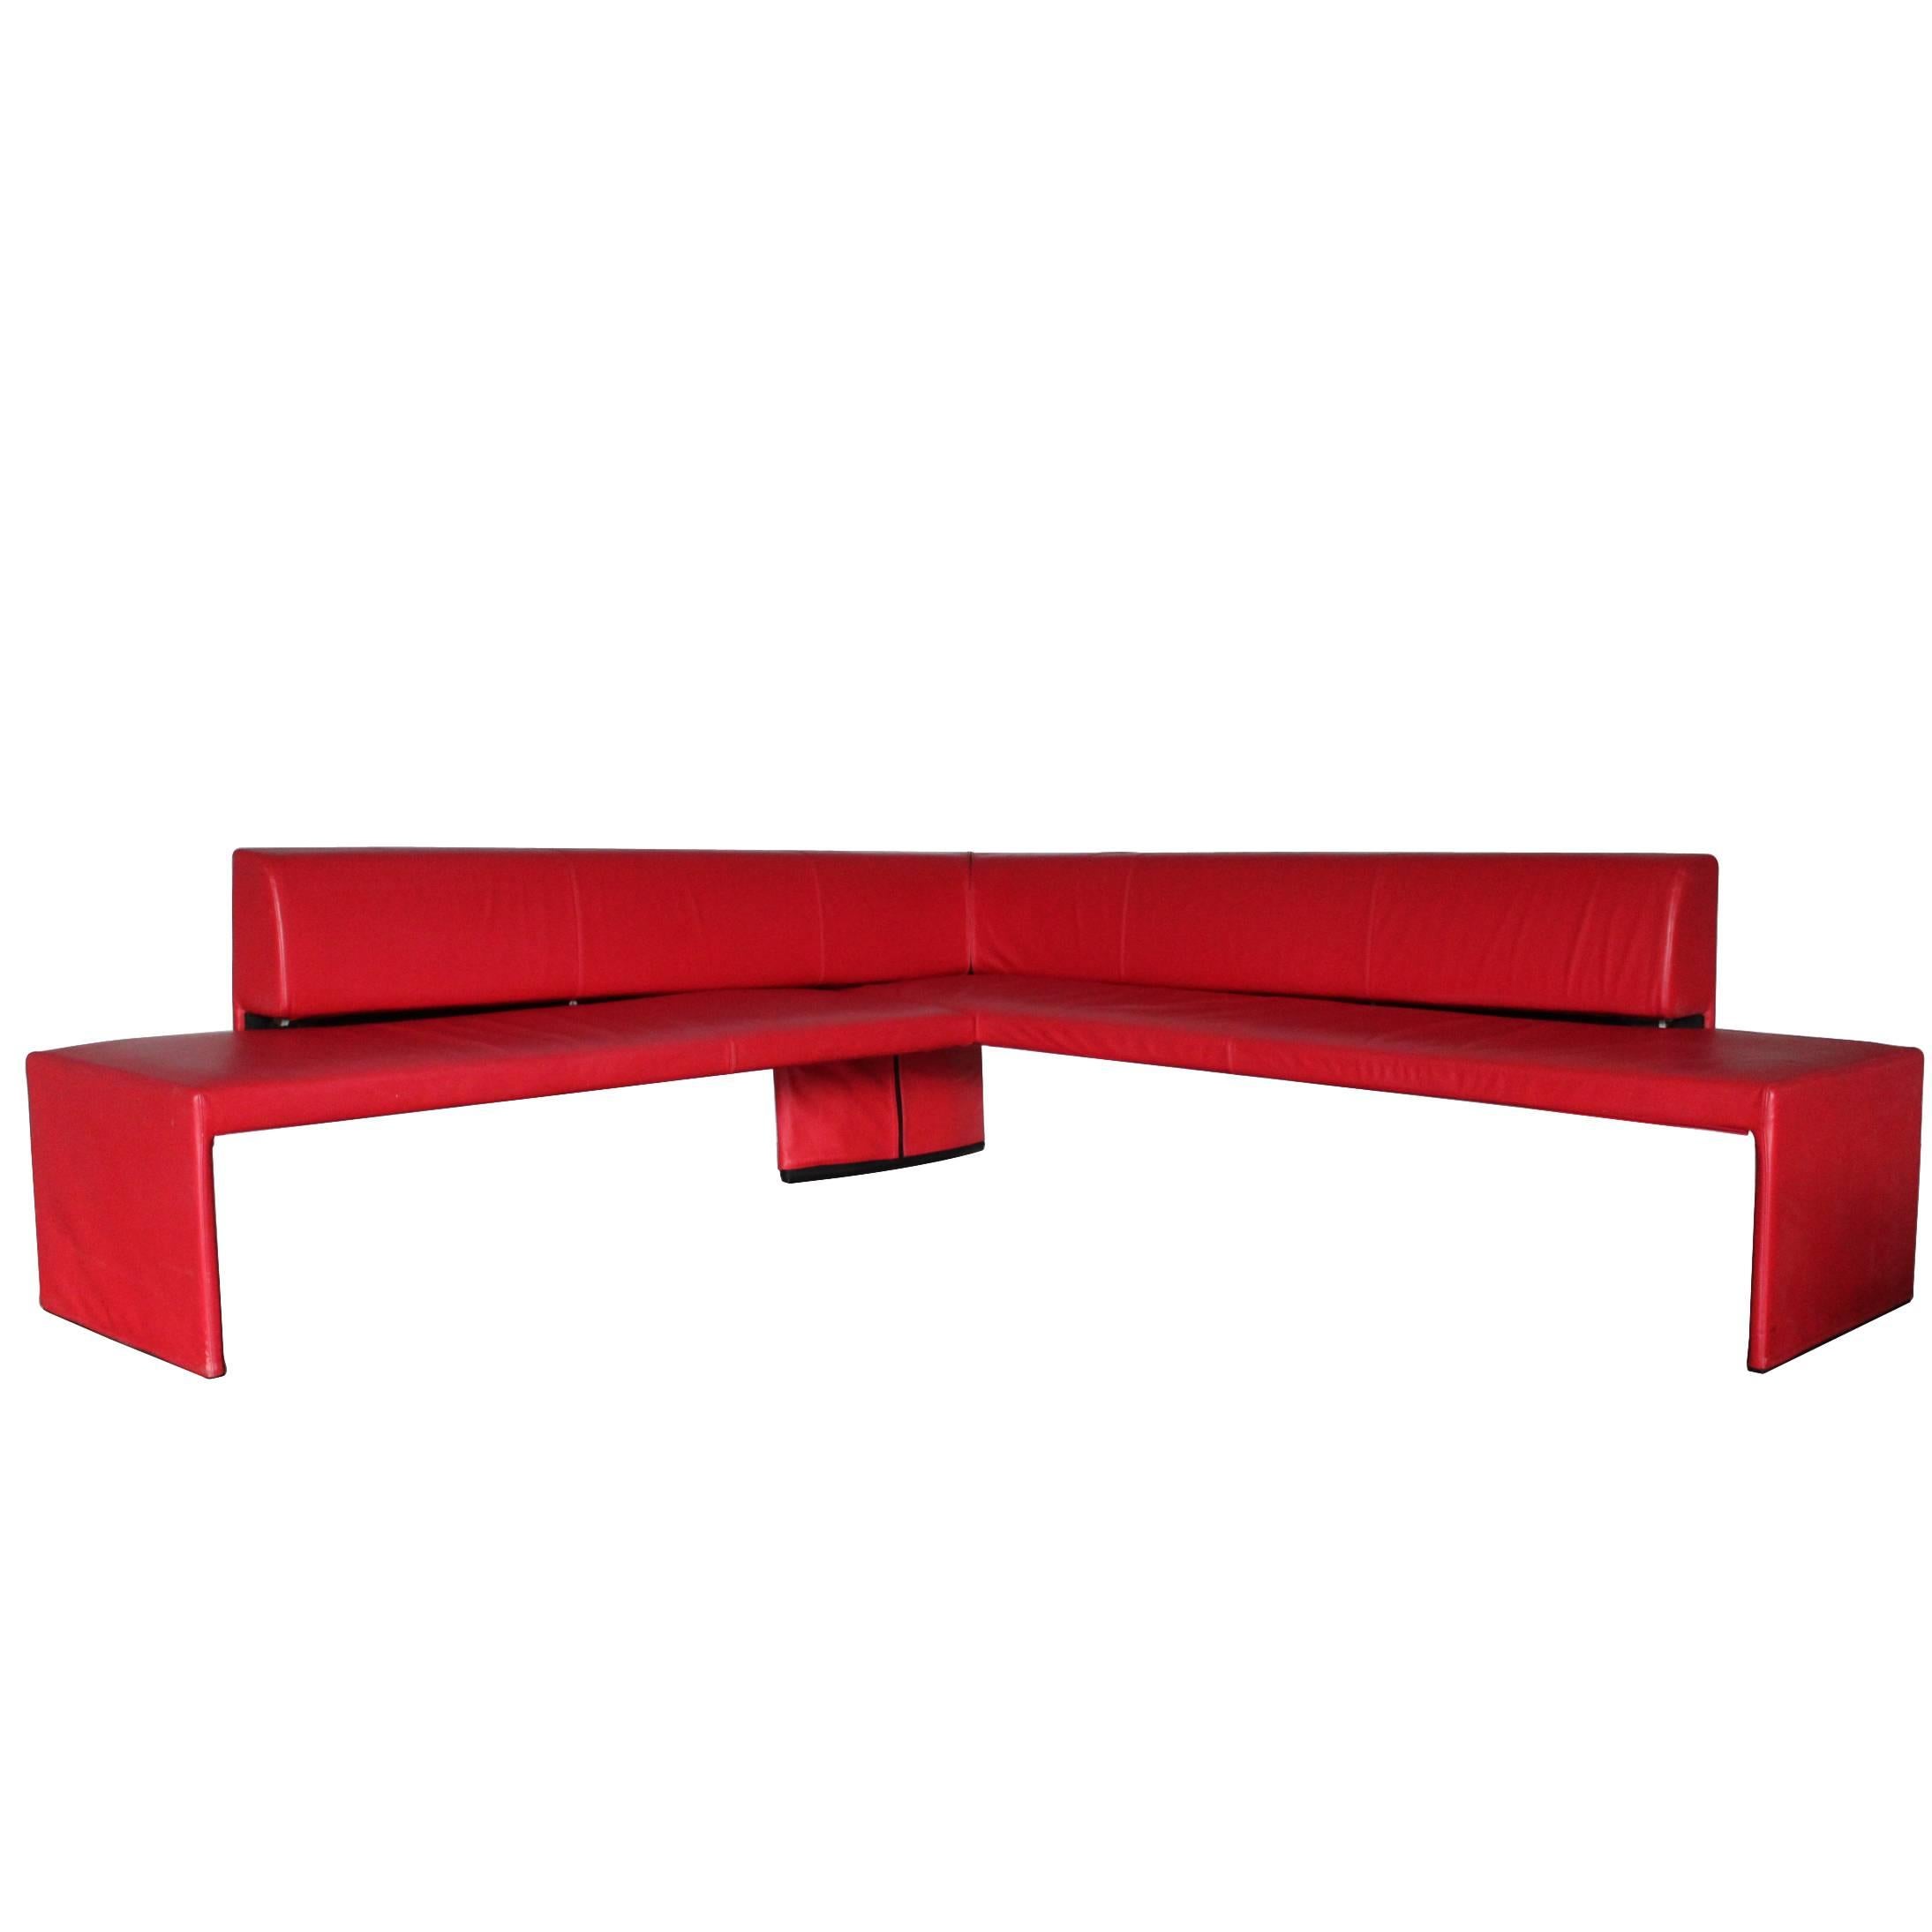 Walter Knoll “Together 290” Corner Seat L-shape Sofa in Red Leather by EOOS For Sale